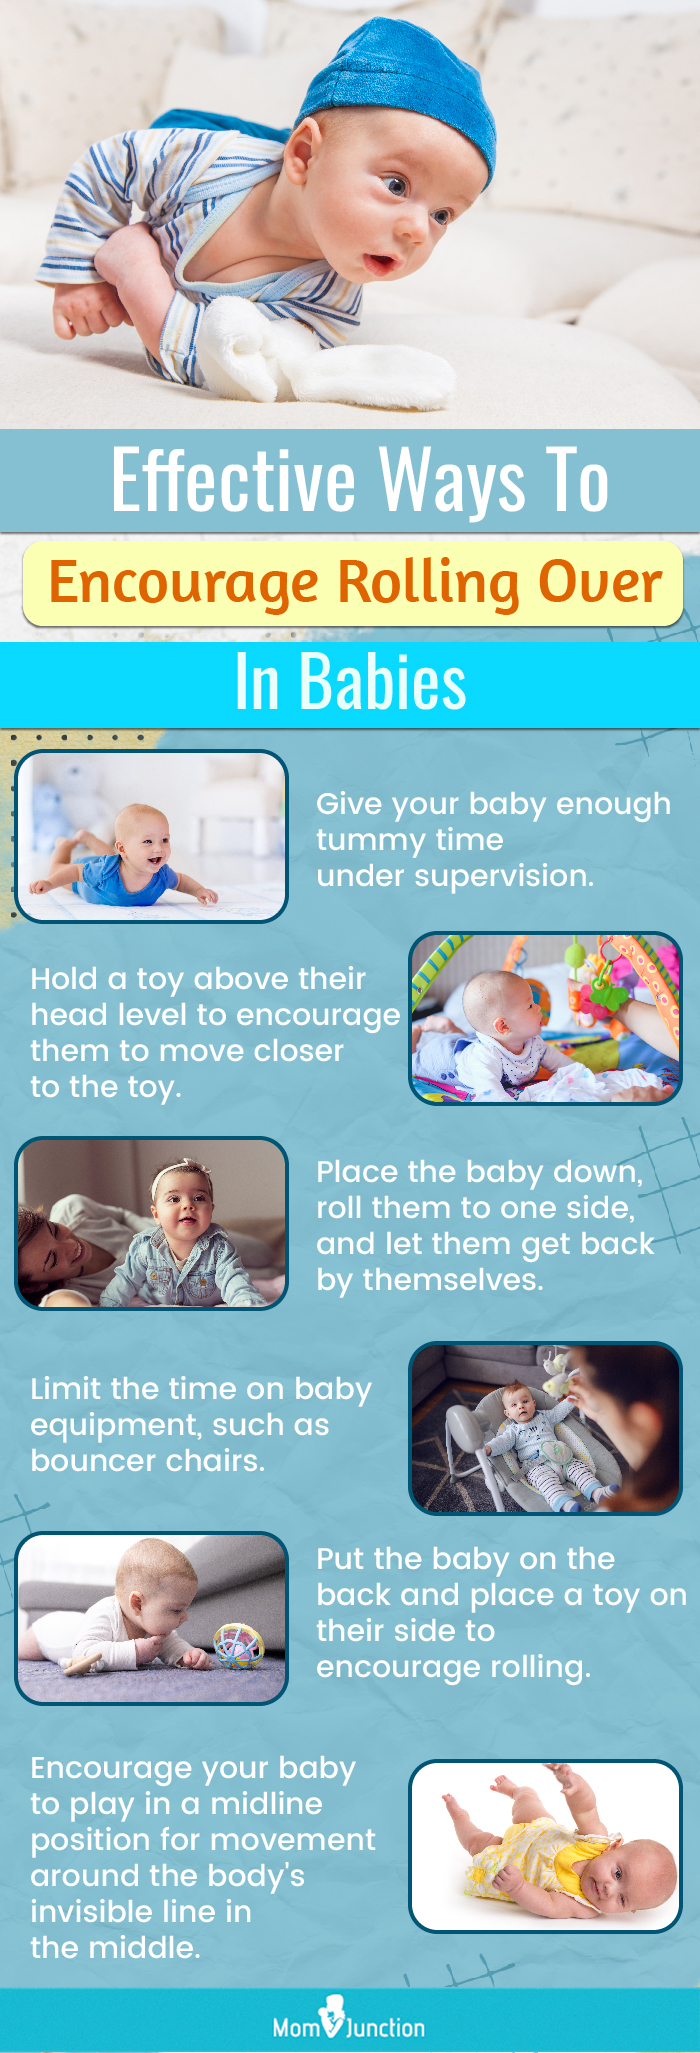 Reposition and roll 'em over: Tummy time matters